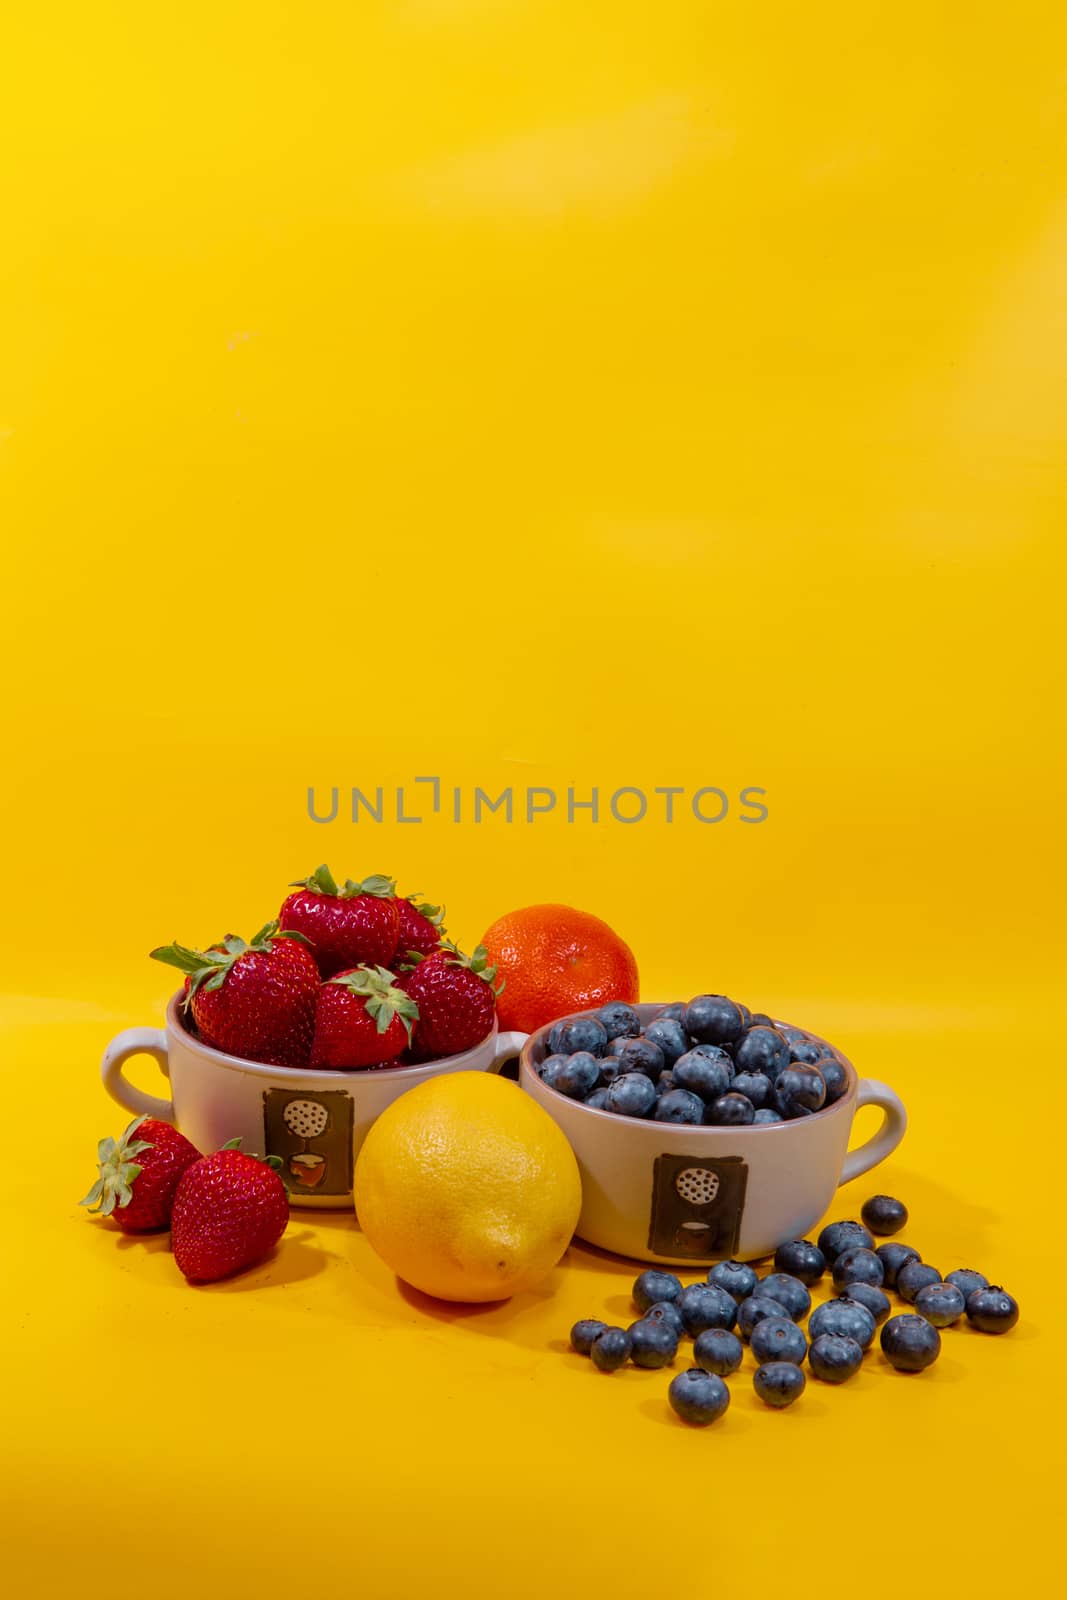 Blueberries and strawberries in ceramic cups against a yellow ba by ben44